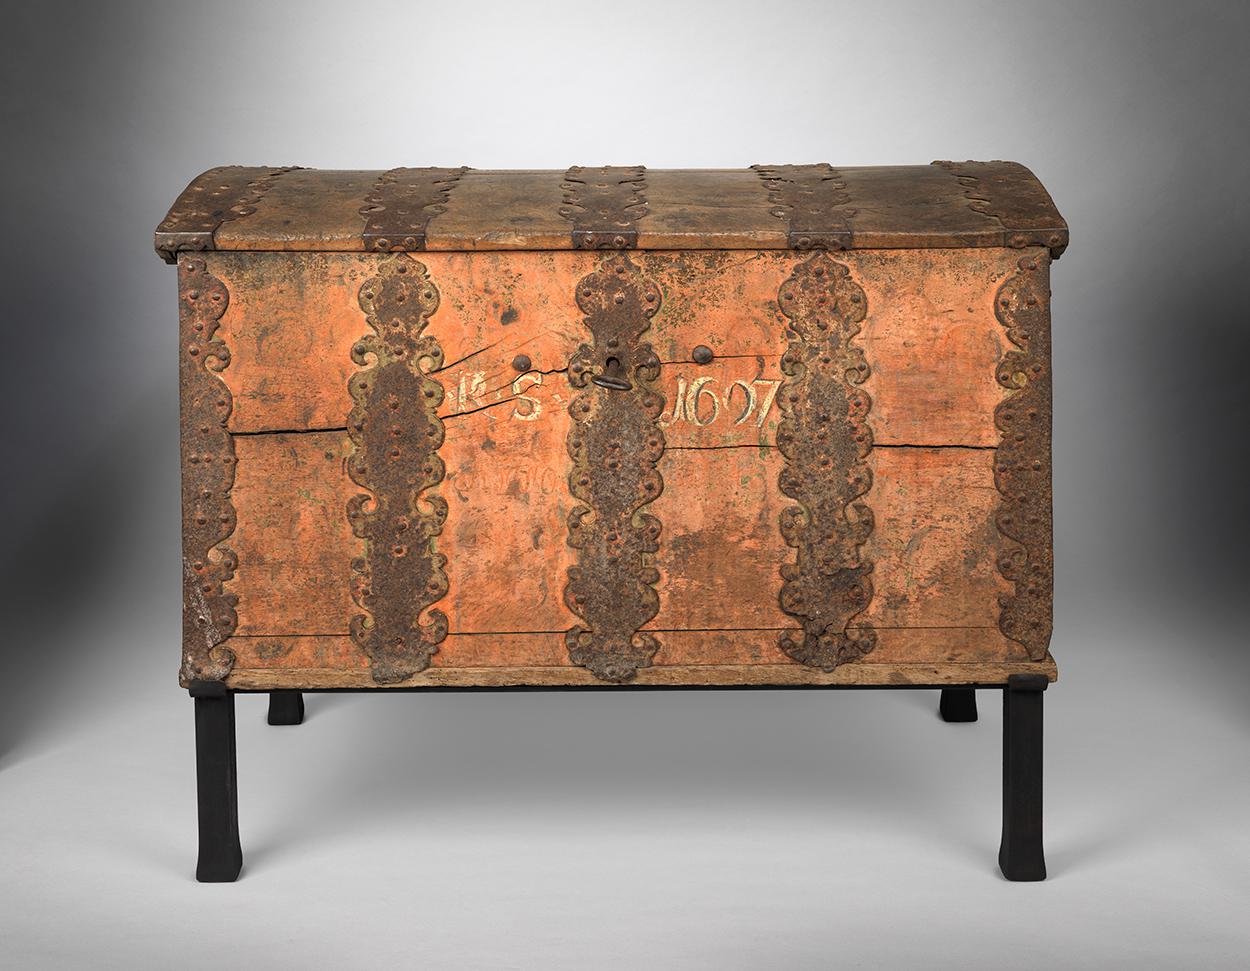 Exceptional Early Folk Art Marriage Chest